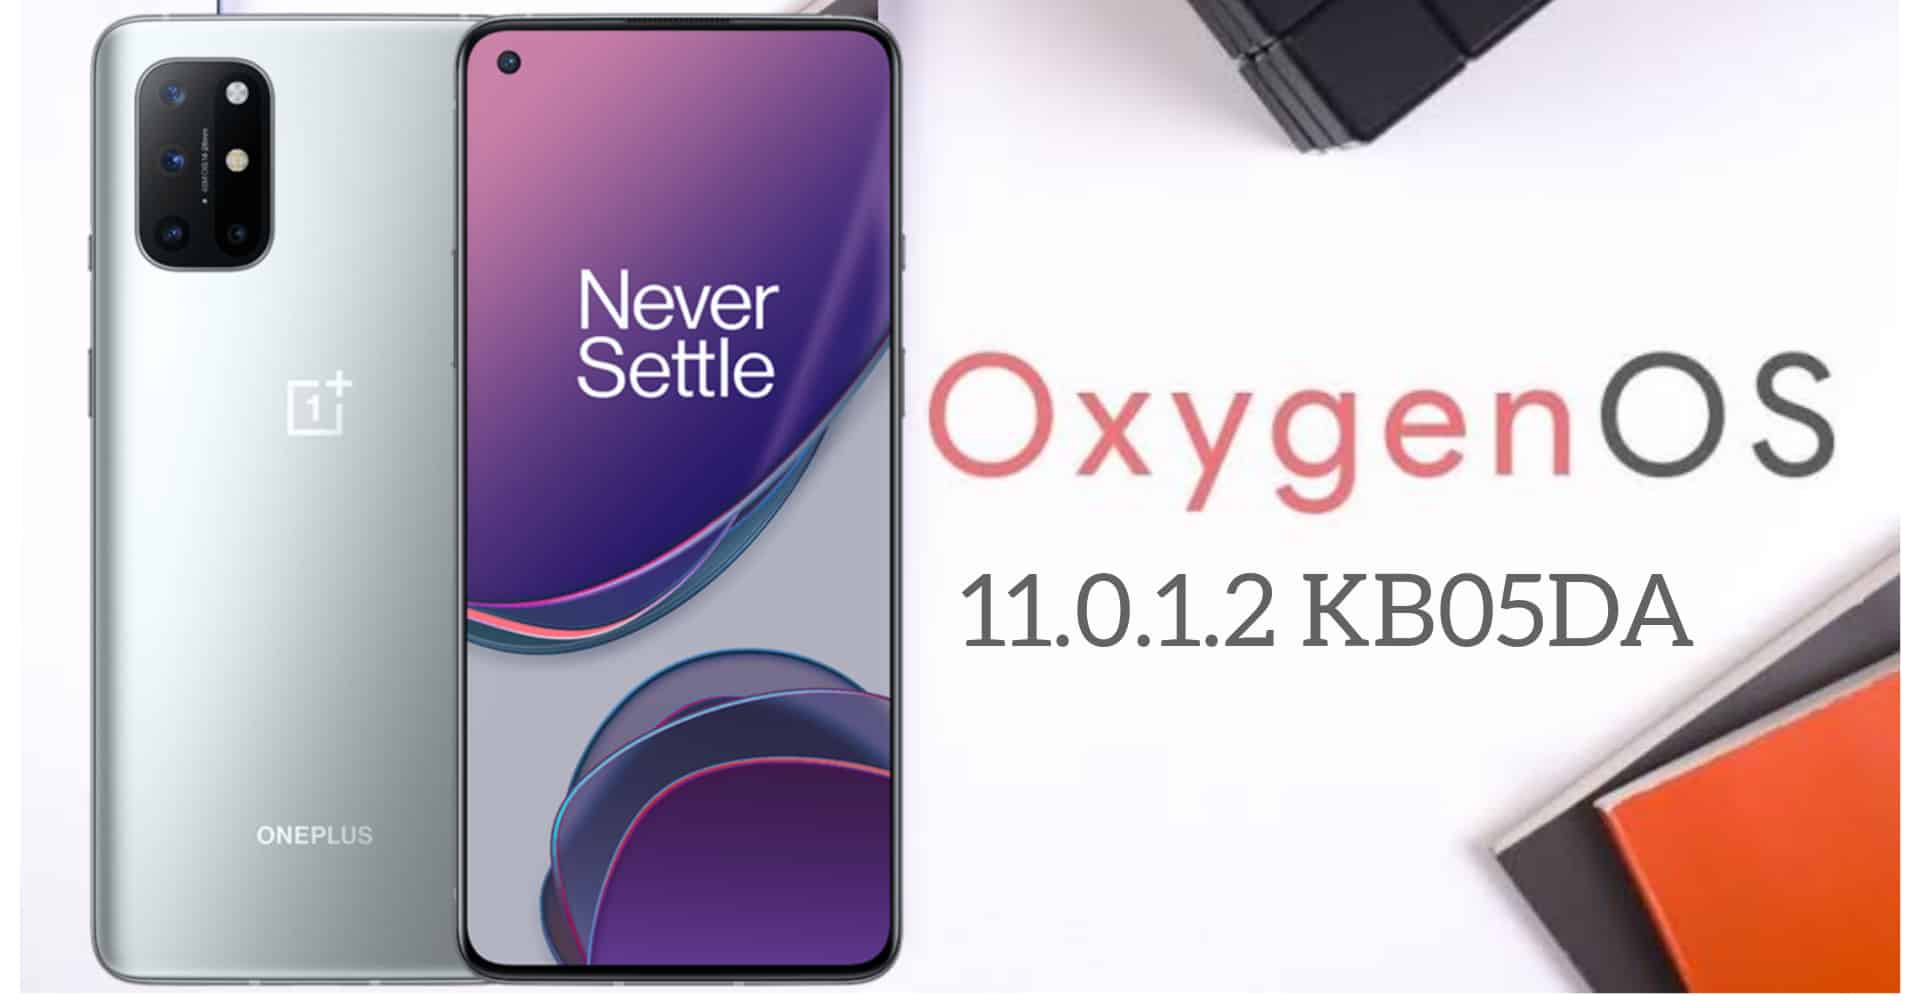 OnePlus 8T Receives First OxygenOS Update in India, Forces Amazon App